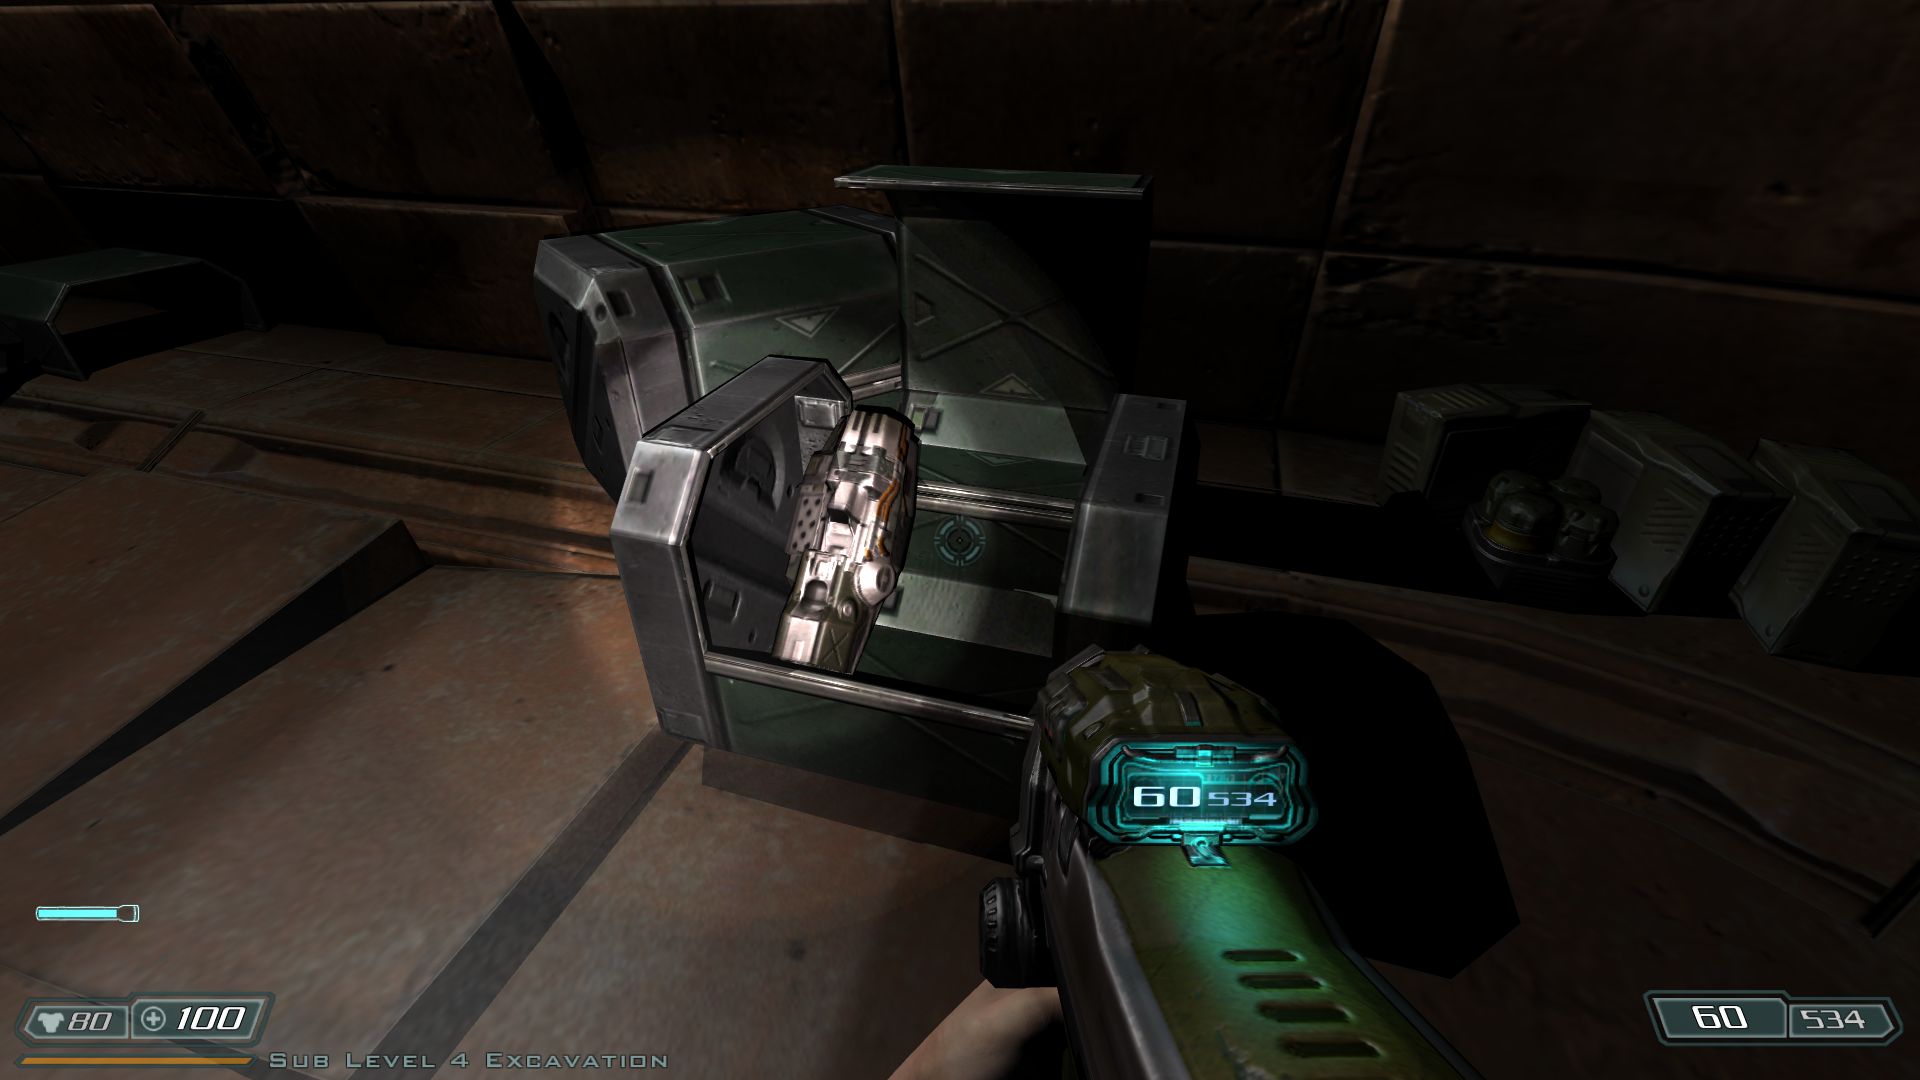 A BFG is one of the weapons in a crate at the start of the level. 